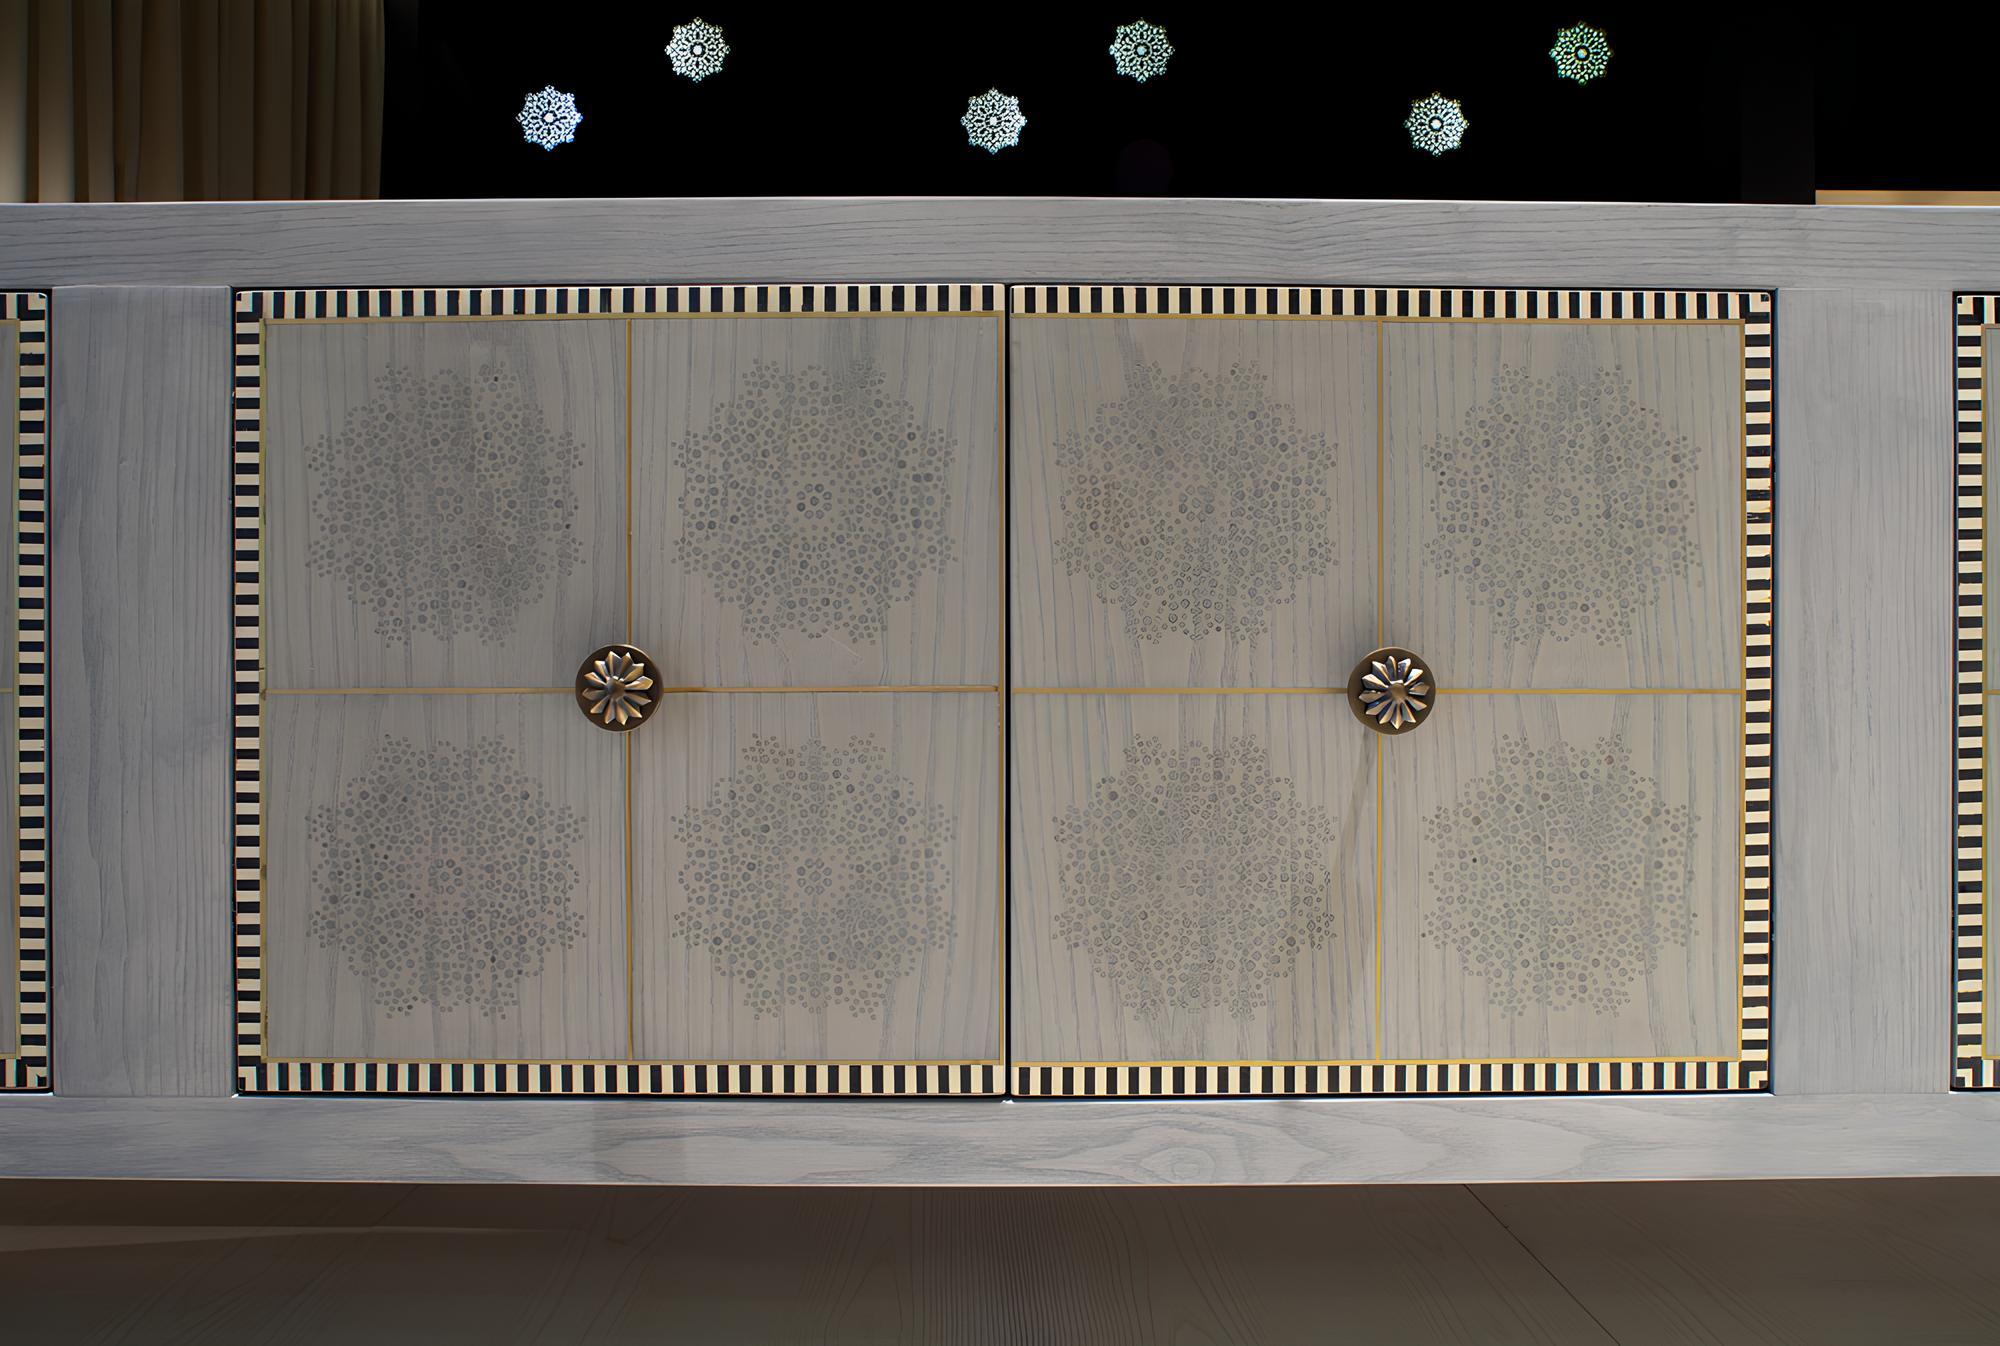 
Introducing the Adelphi sideboard designed by Archer Humphryes Architects—a testament to exquisite craftsmanship and refined design. This wooden long sideboard boasts a commanding presence with its rigorous and linear profiles, capturing the